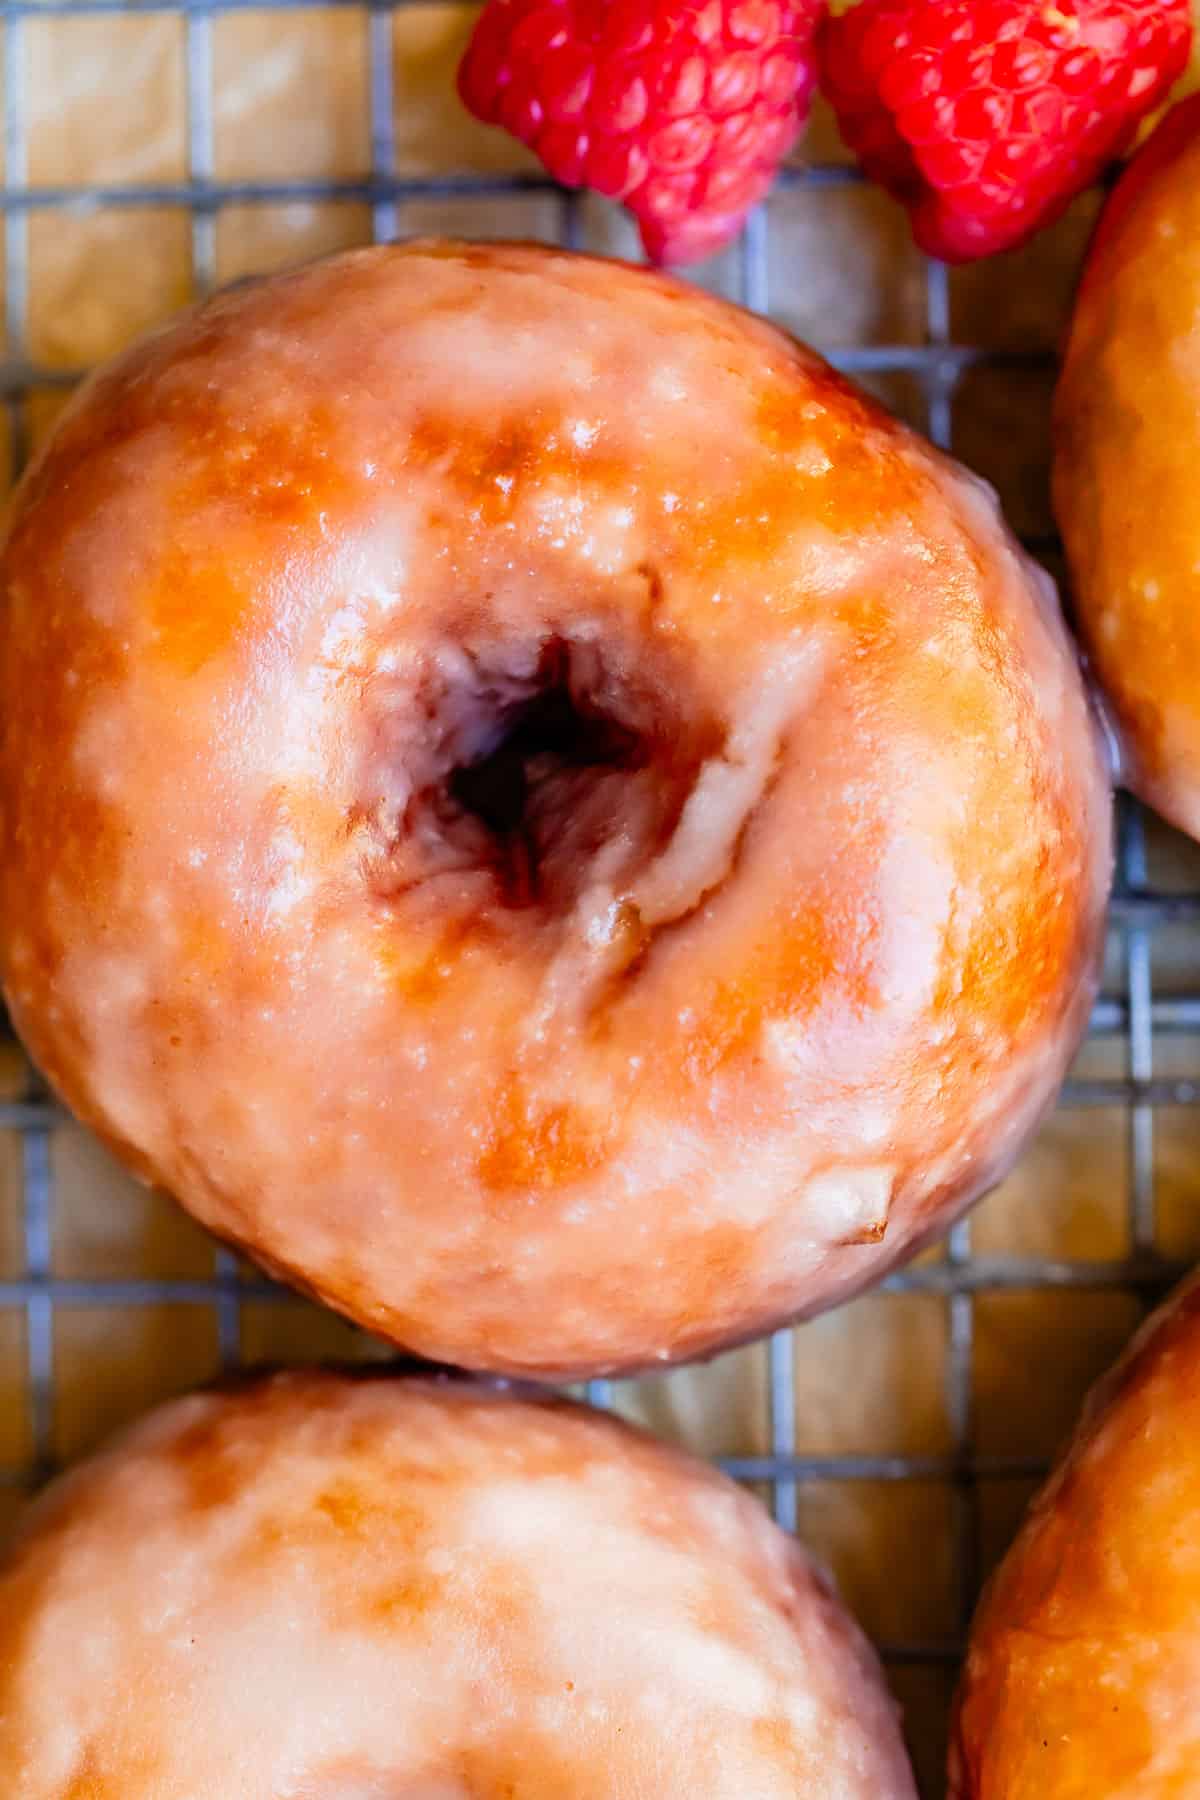 close up of one perfectly made from scratch glazed donut with raspberries next to it.